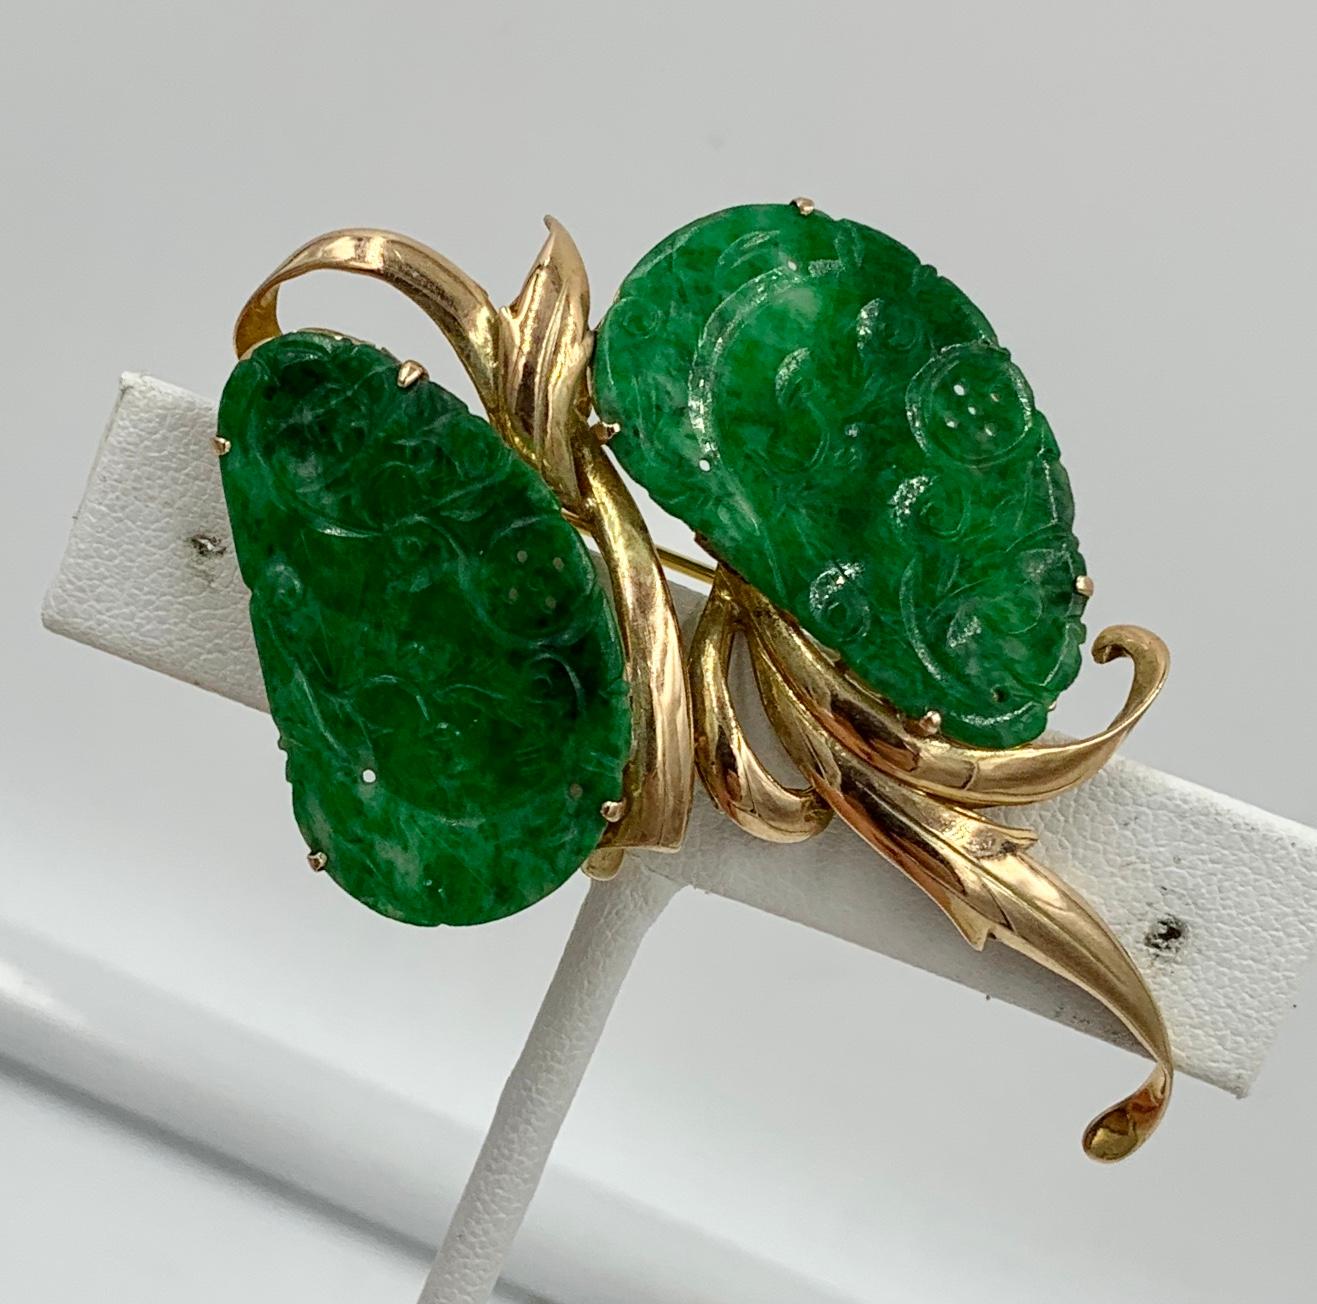 This is a stunning antique Carved Jade Brooch Pin in 14 Karat Yellow Gold marked H.K and dating to the Mid-Century Modern Period.  The two jade medallions have wonderful green color and are beautifully carved jade in a leaf form.  The jade is set in